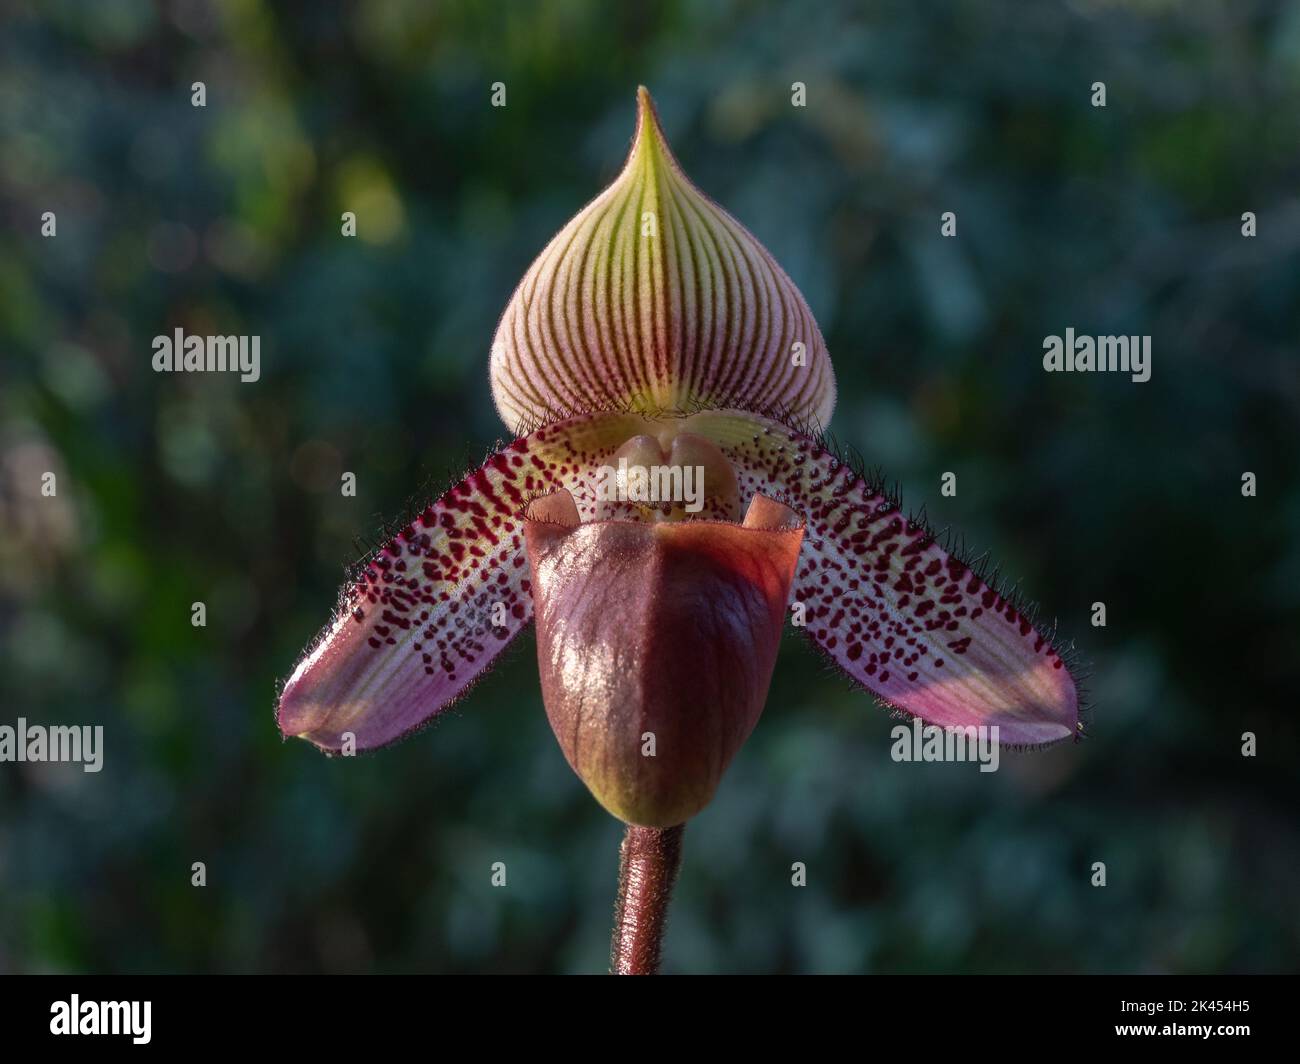 Closeup front view of lady slipper orchid paphiopedilum superbiens (species) with purple red flower outdoors in sunlight on natural background Stock Photo